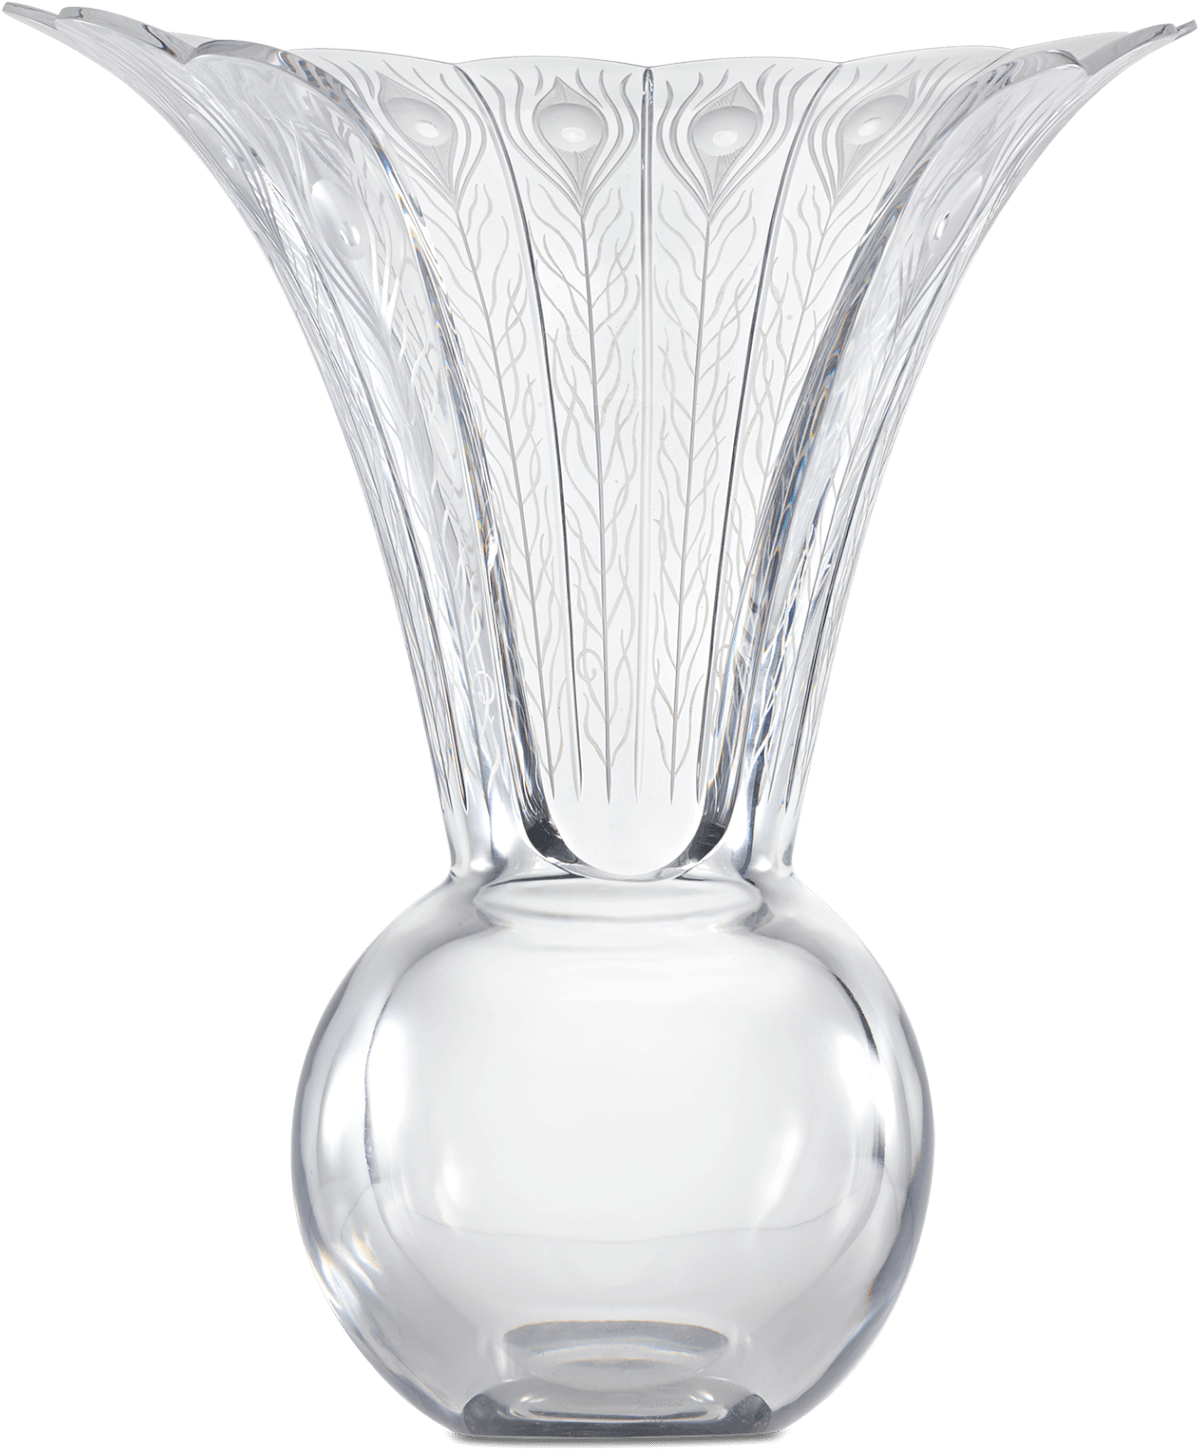 A Clear Glass Vase With A Round Ball